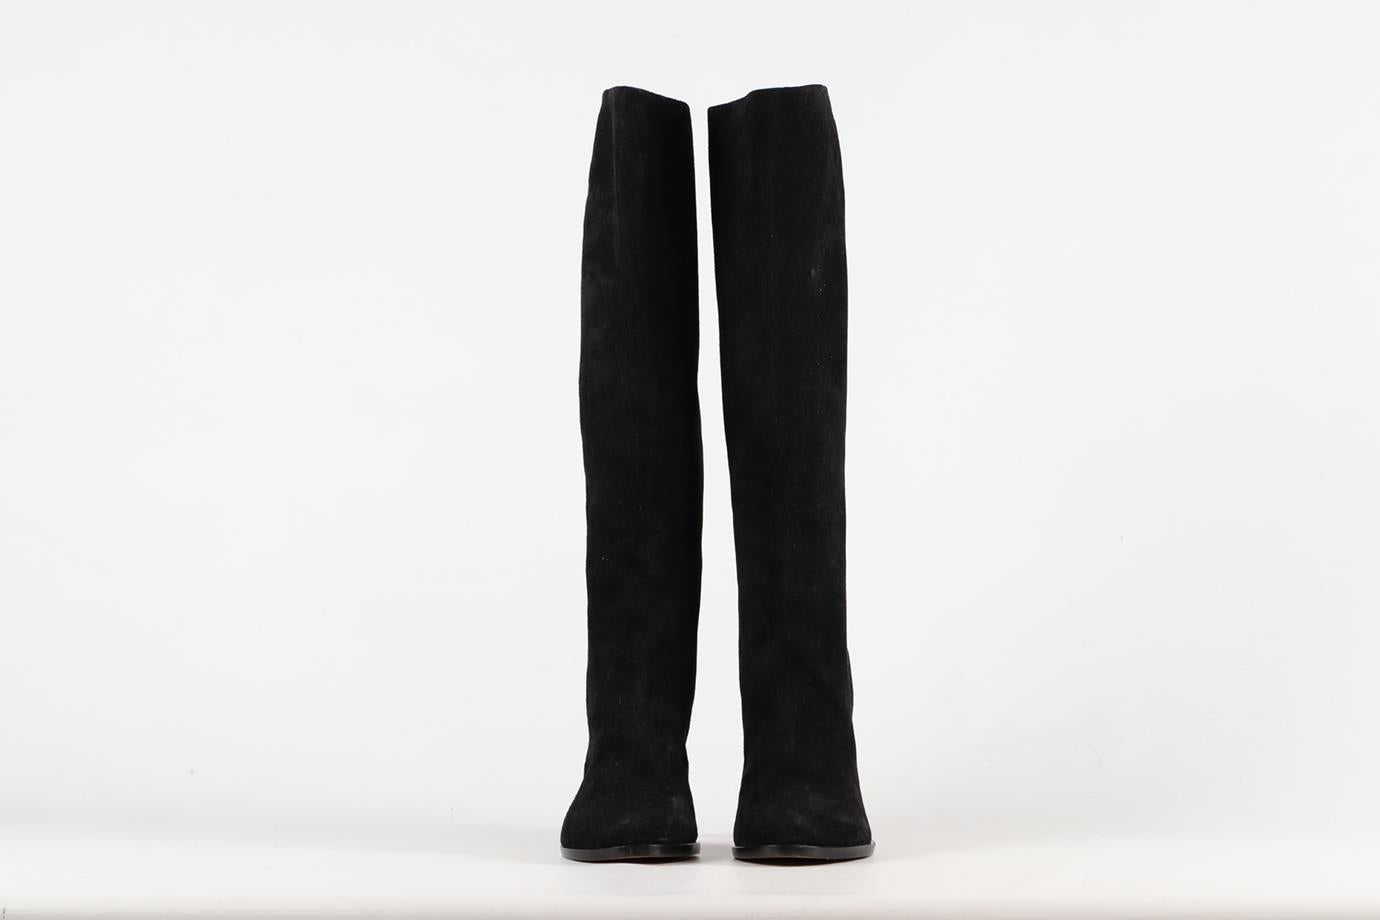 GIVENCHY SUEDE KNEE HIGH BOOTS EU 38.5 UK 5.5 US 8.5